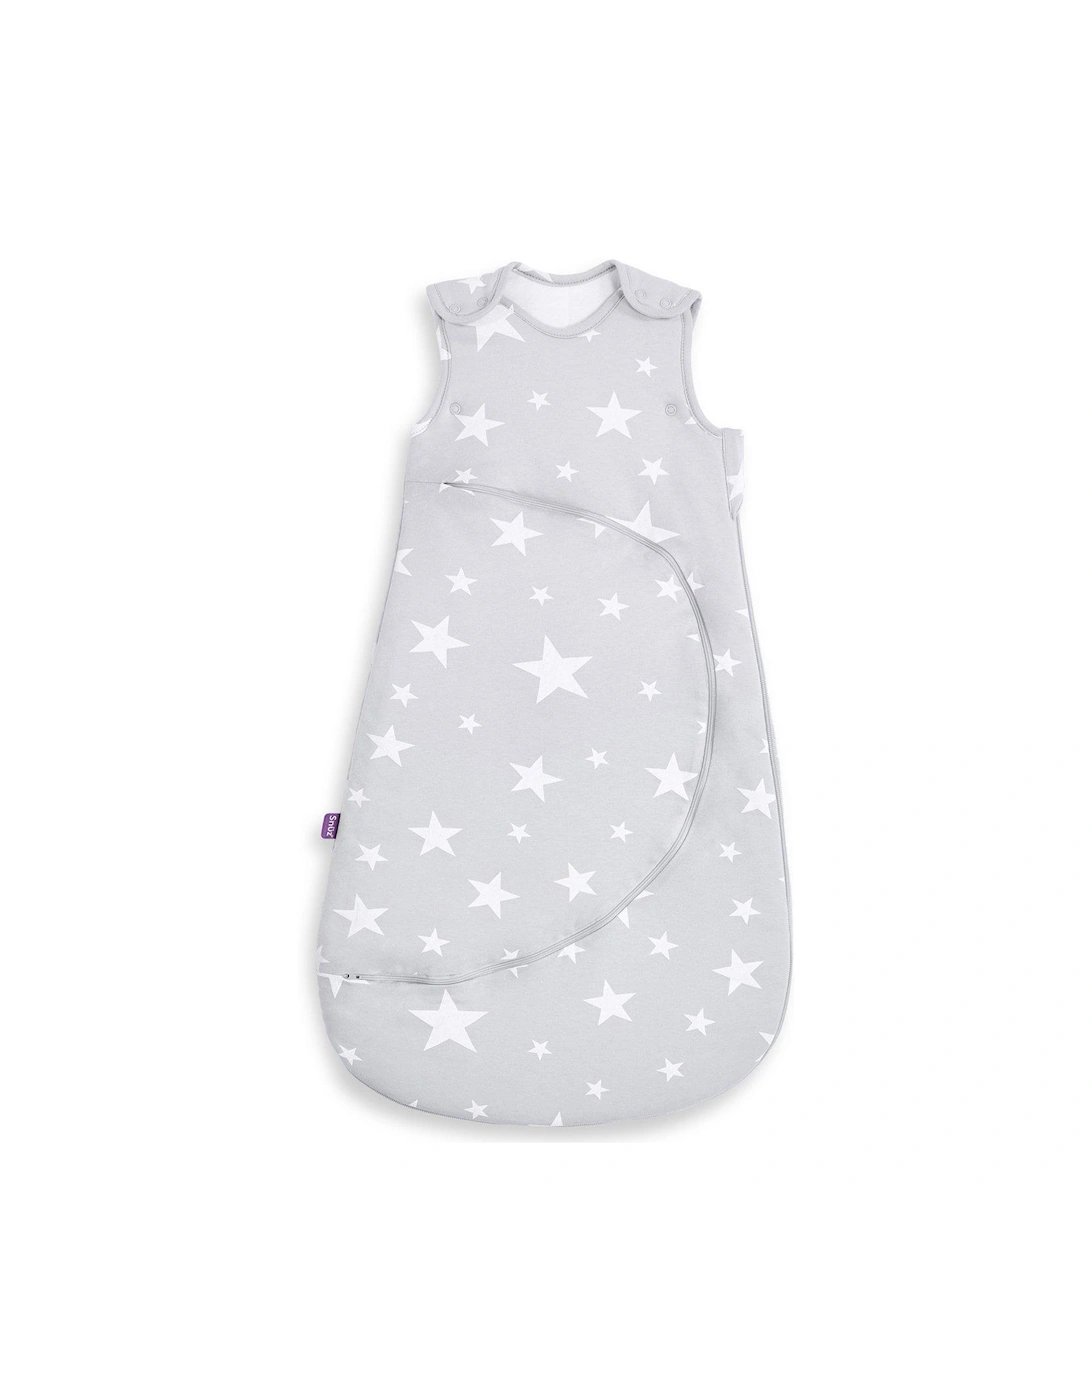 SnuzPouch Sleeping Bag, 2.5 Tog - White Star, 0-6M, 2 of 1